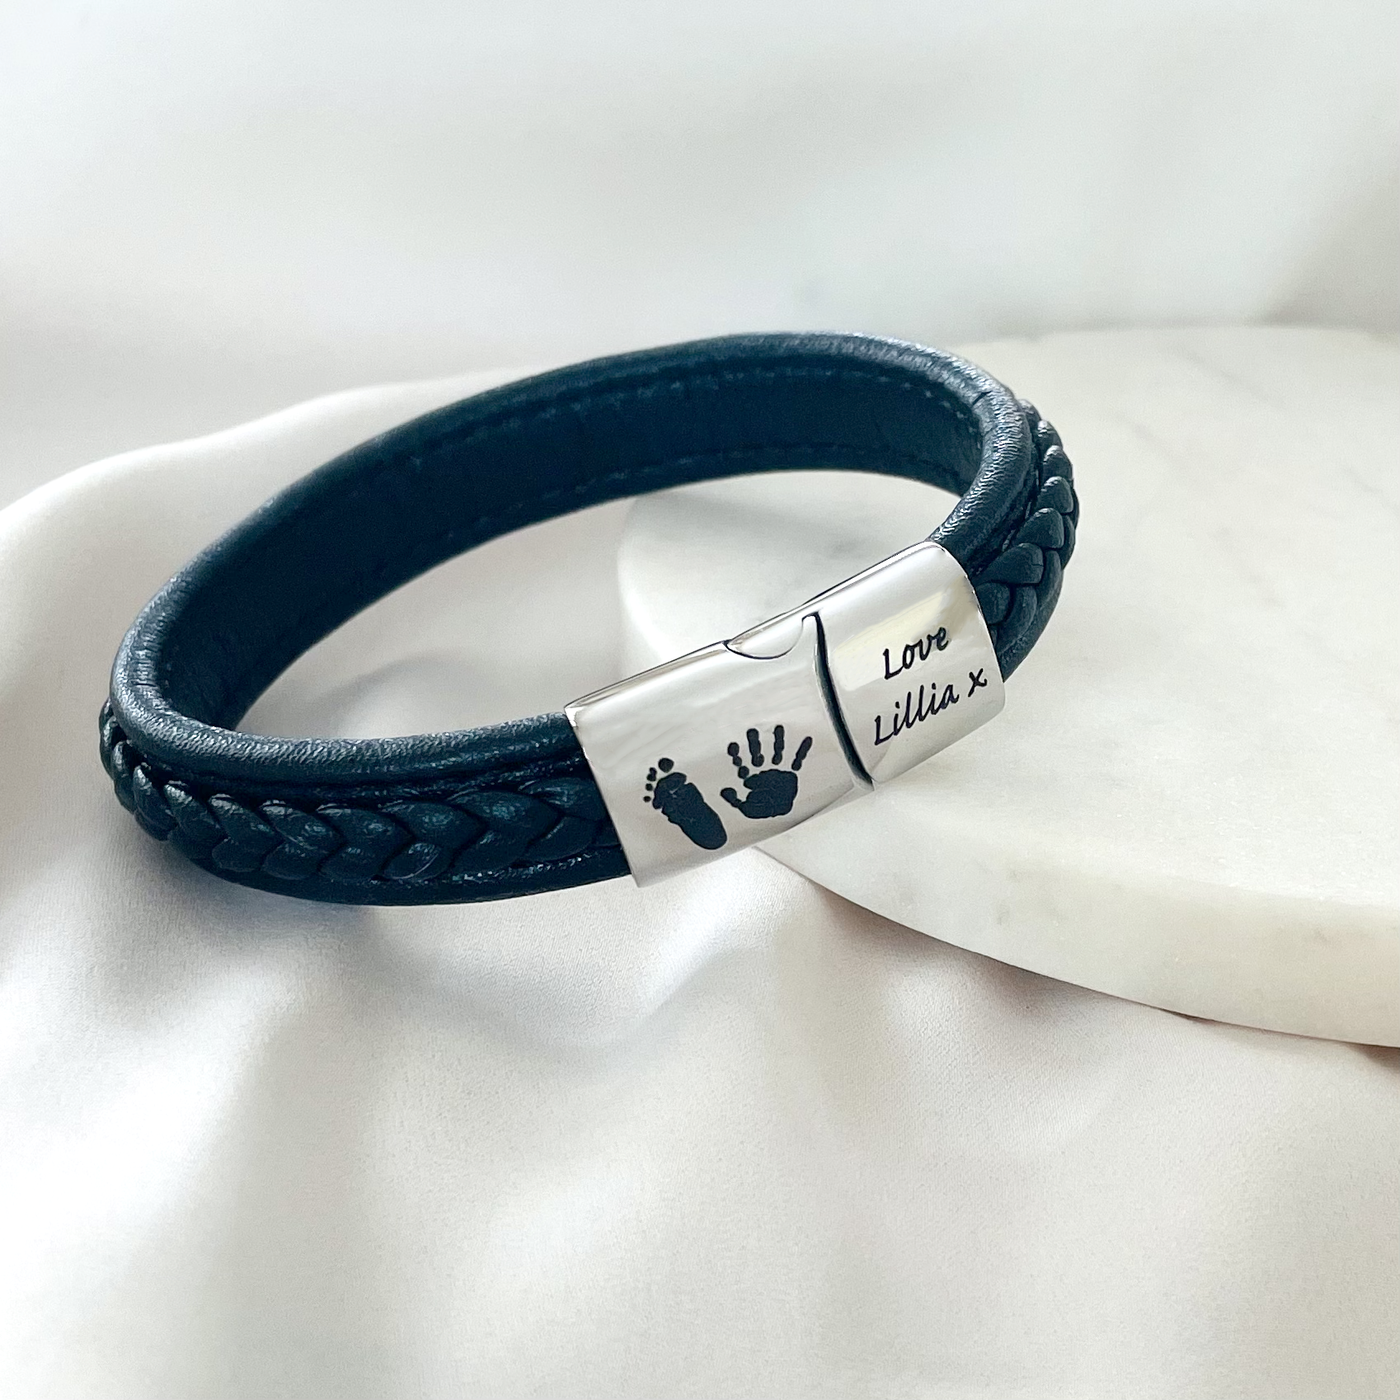 DAD'S PERSONALIZED LEATHER ENGRAVED BRACELET |  FOREVER IMPRINT JEWELLERY